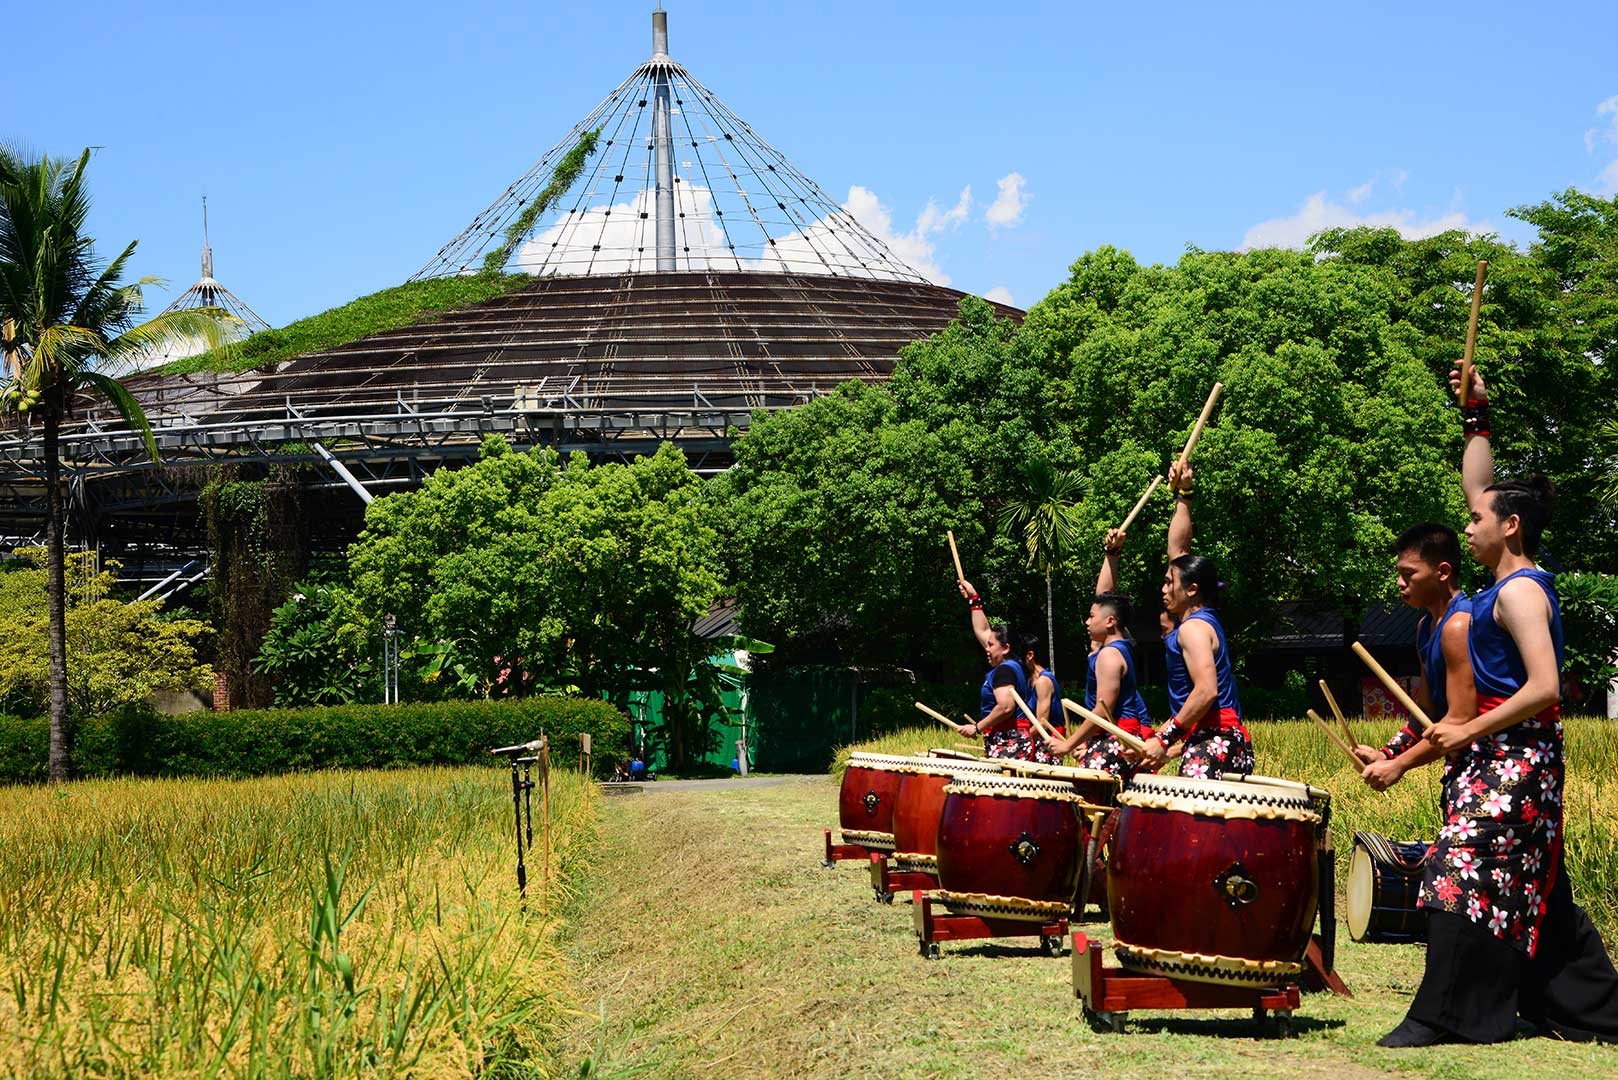 Mowing experience in combination with the Taiko performance